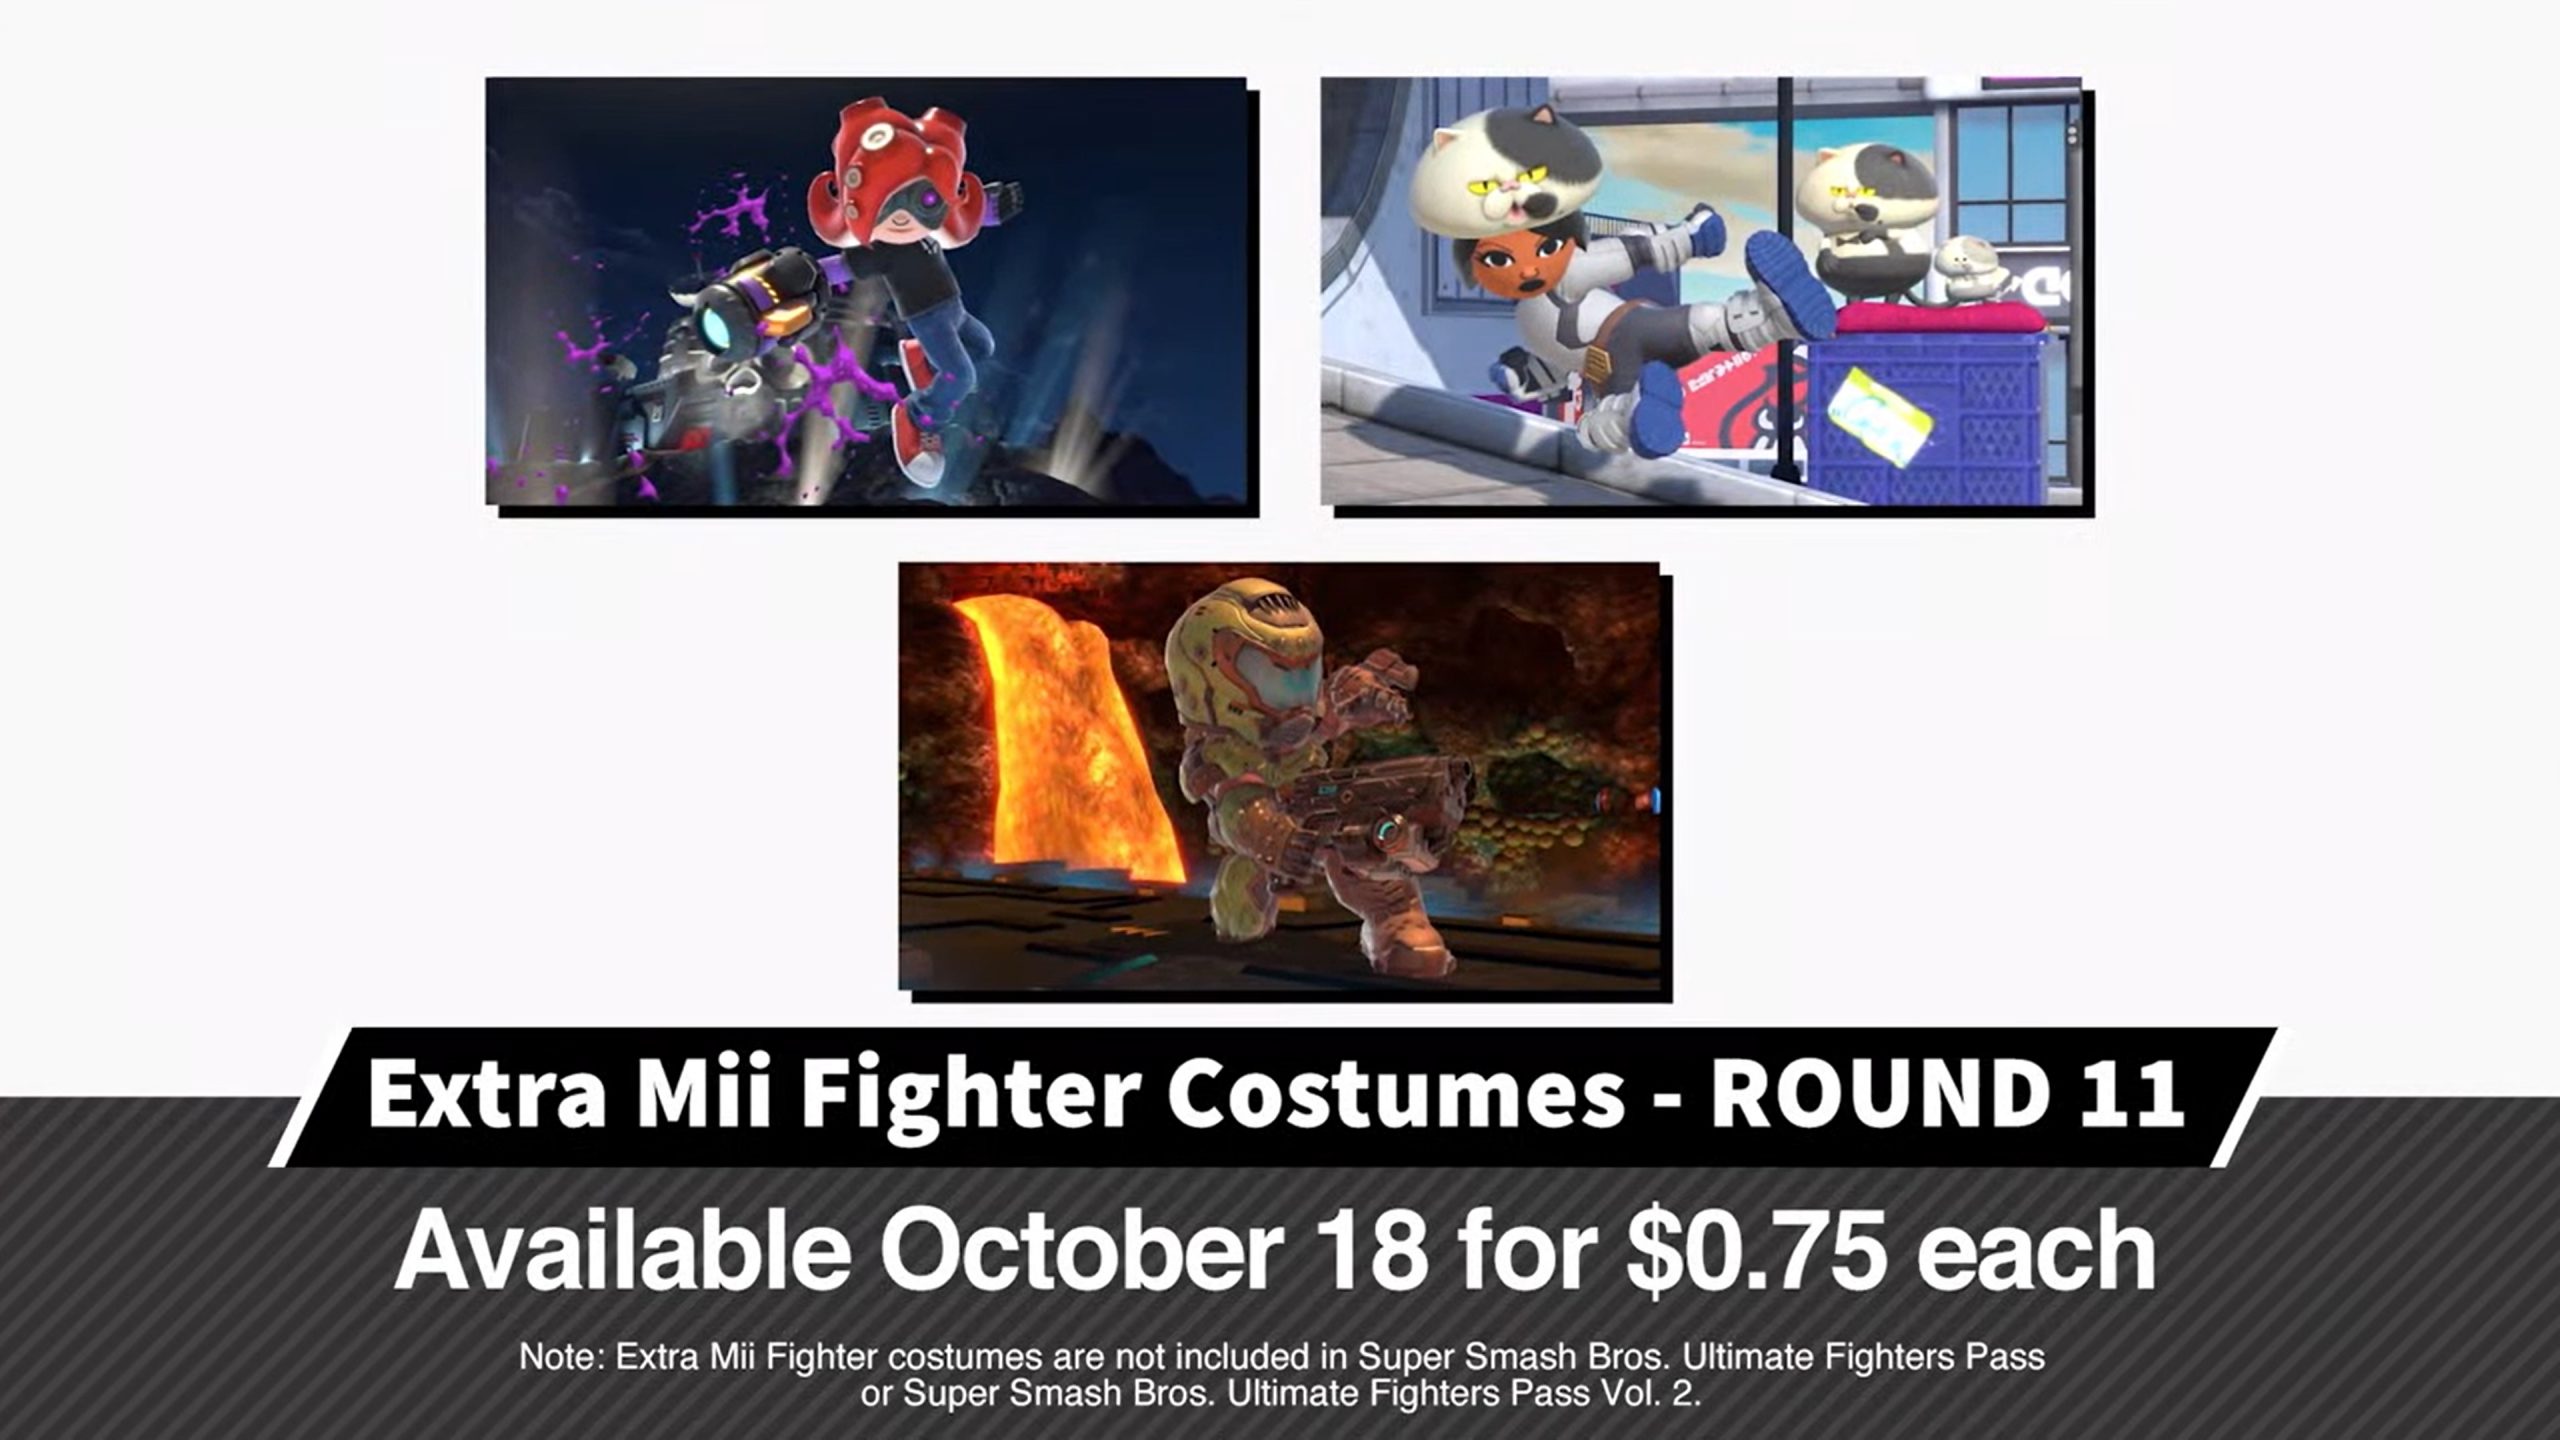 Super Smash Bros. Ultimate Fighters Pass Vol. 2 Amiibo revealed